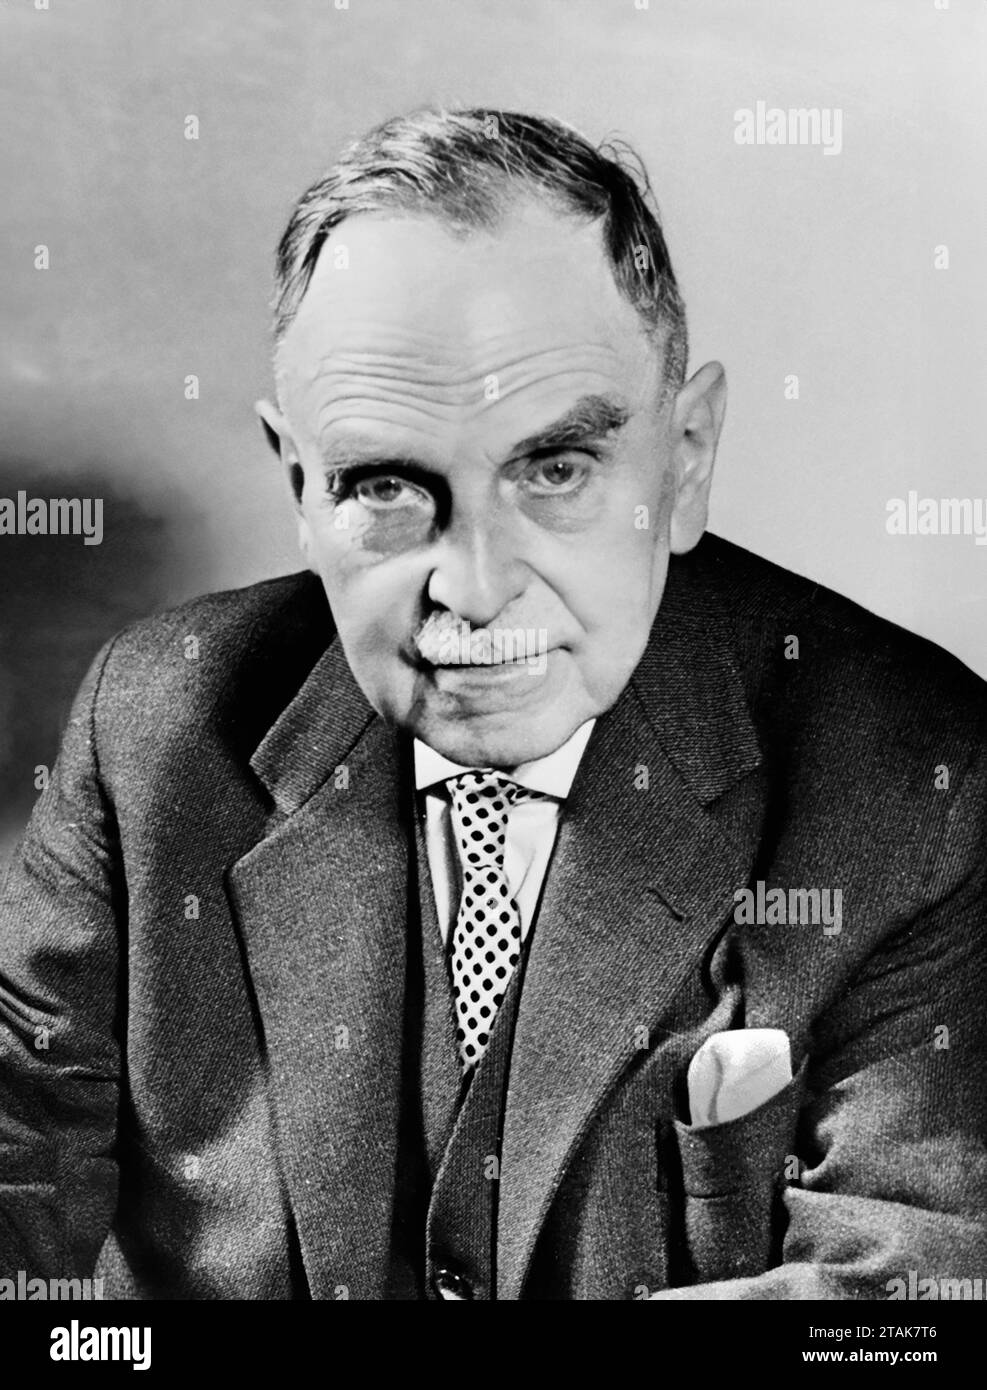 Otto Hahn. The German chemistwho discovered nuclear fission, Otto Hahn (1879-1968) Stock Photo